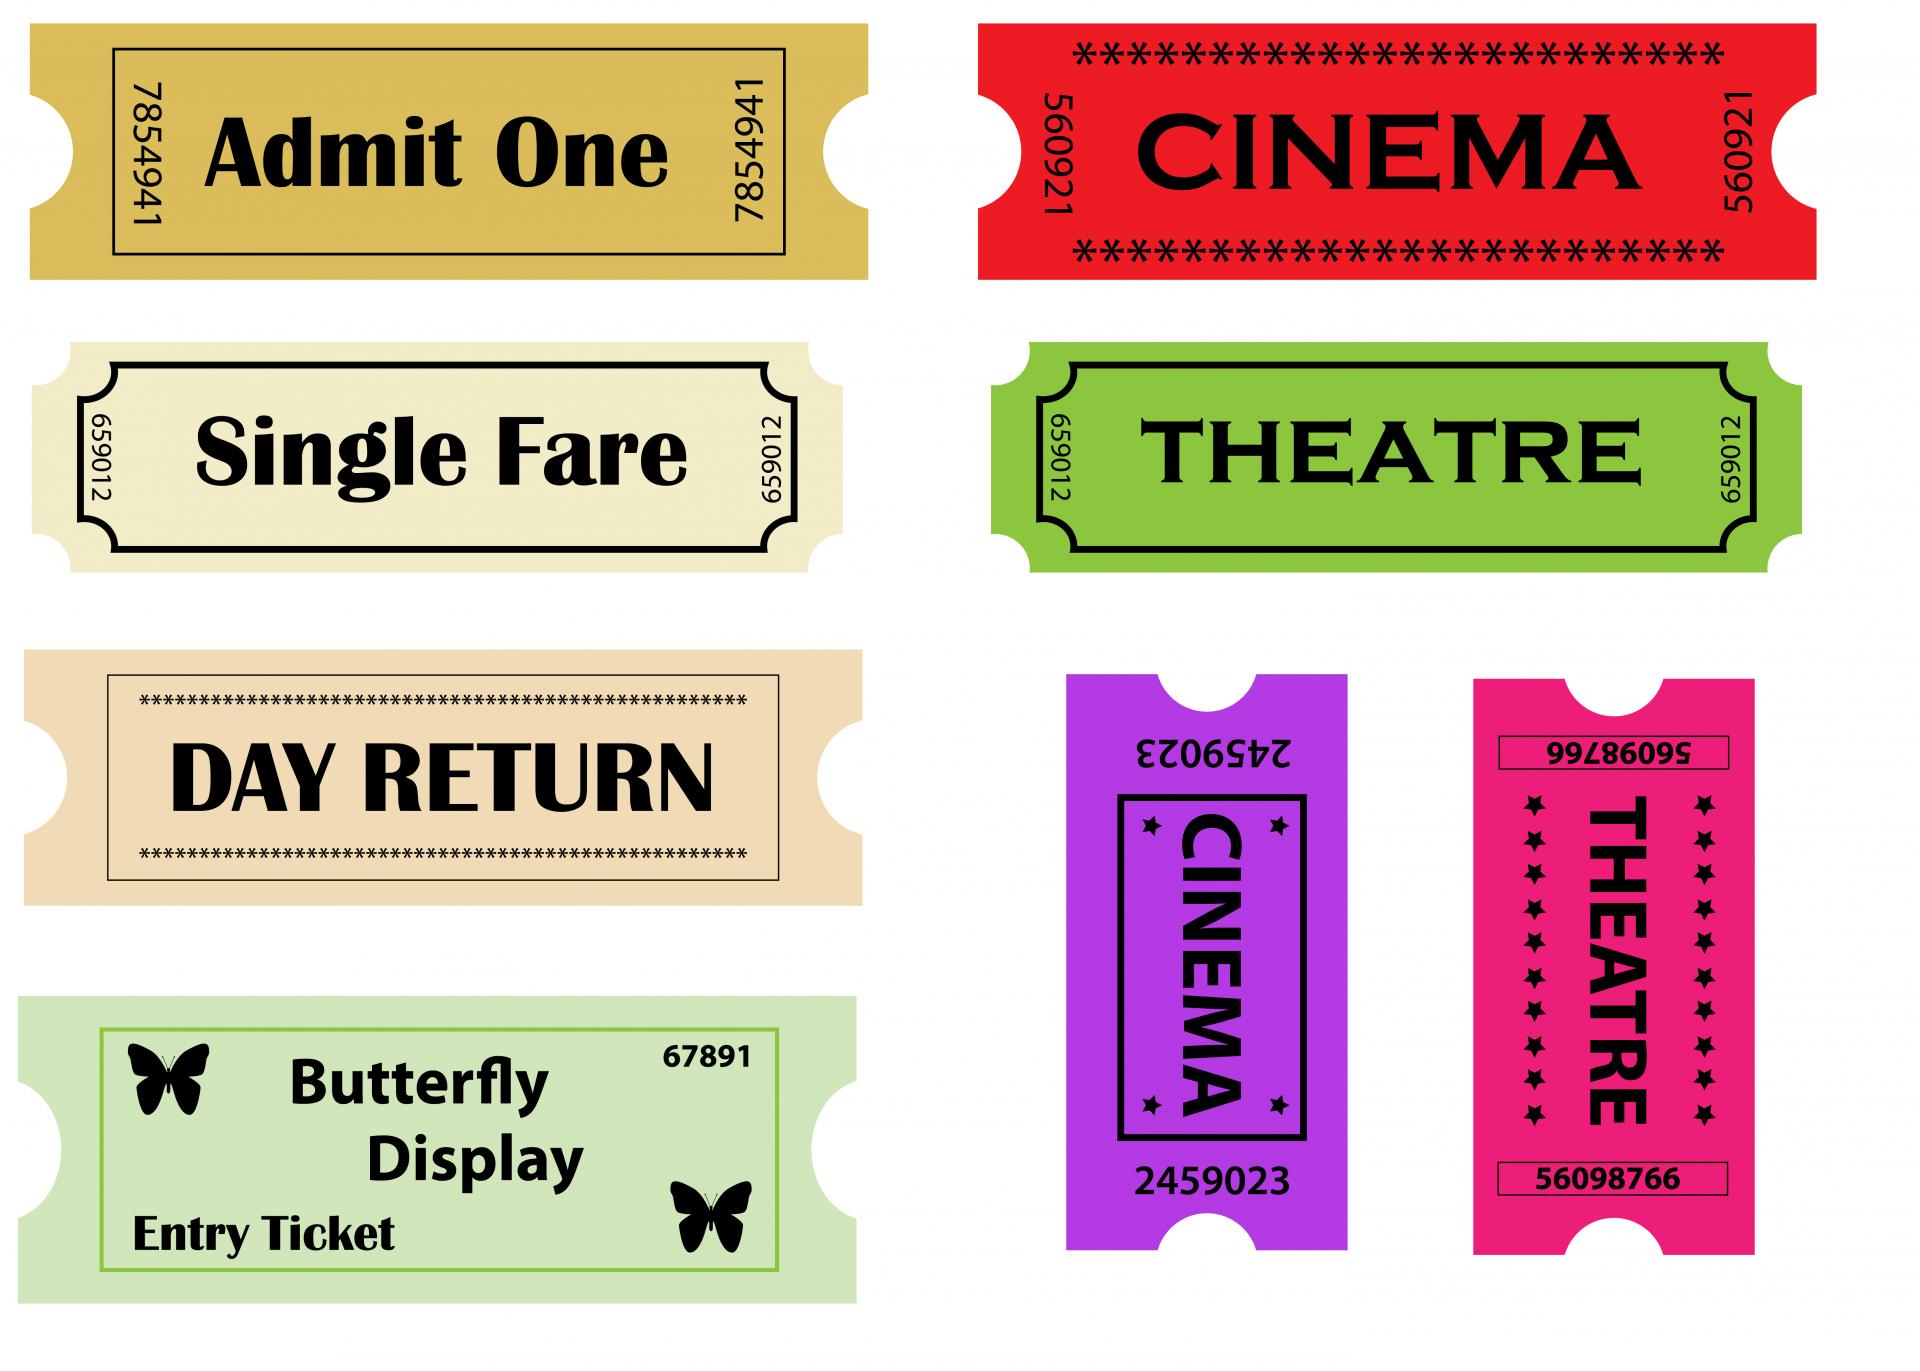 Entry tickets for cinema, theatre, clipart for scrapbooking